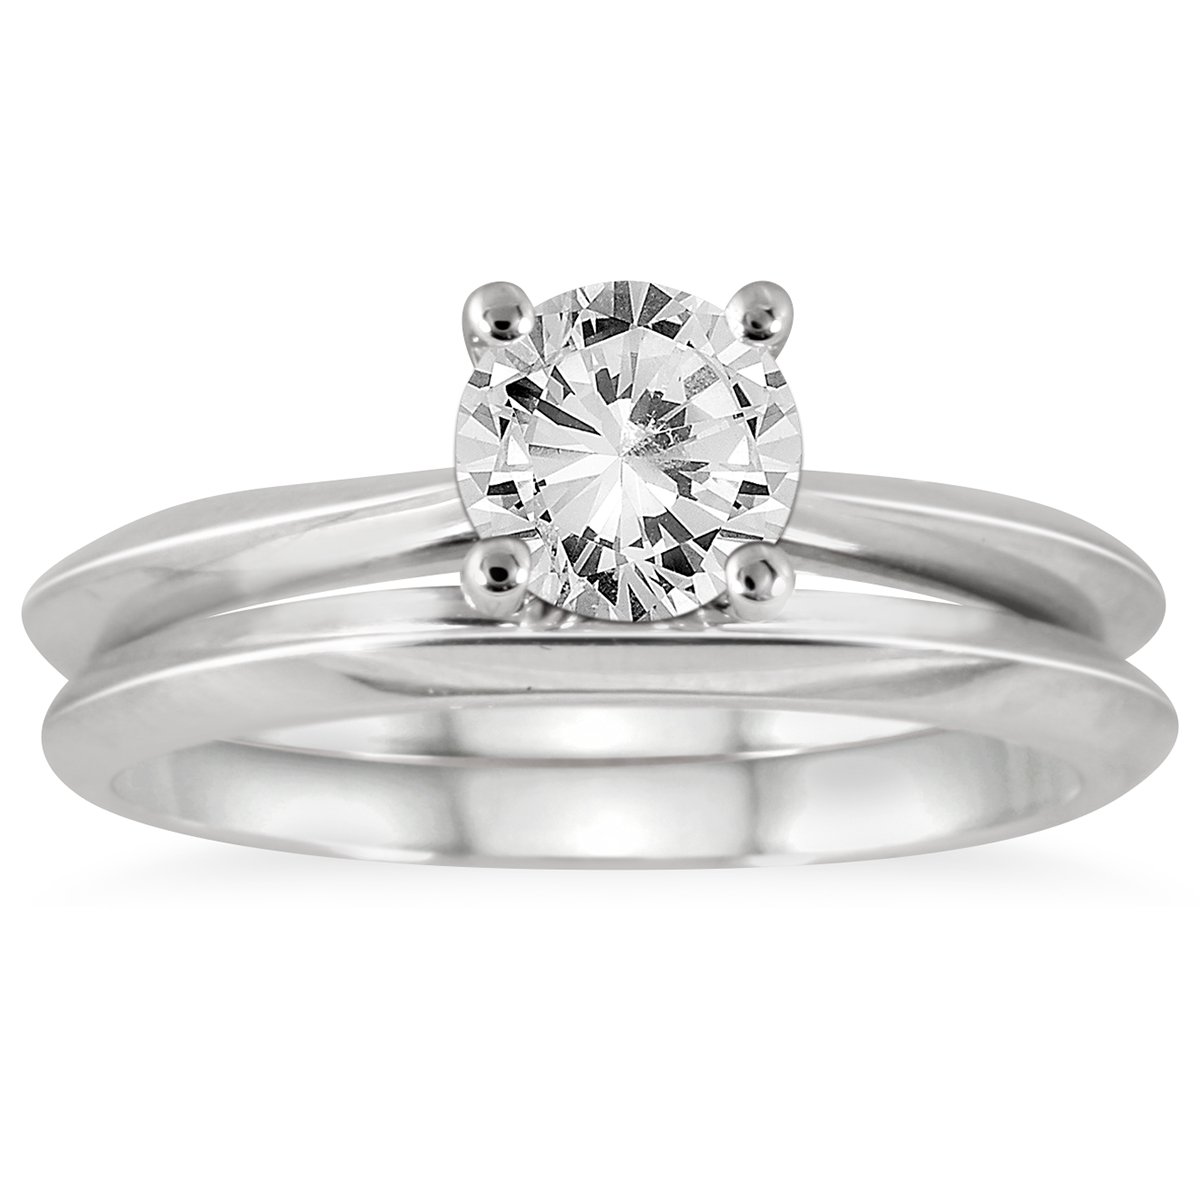 Image of AGS Certified 1 Carat Knife Edge Diamond Bridal Solitaire Set in 14K White Gold (I-J Color I2-I3 Clarity)